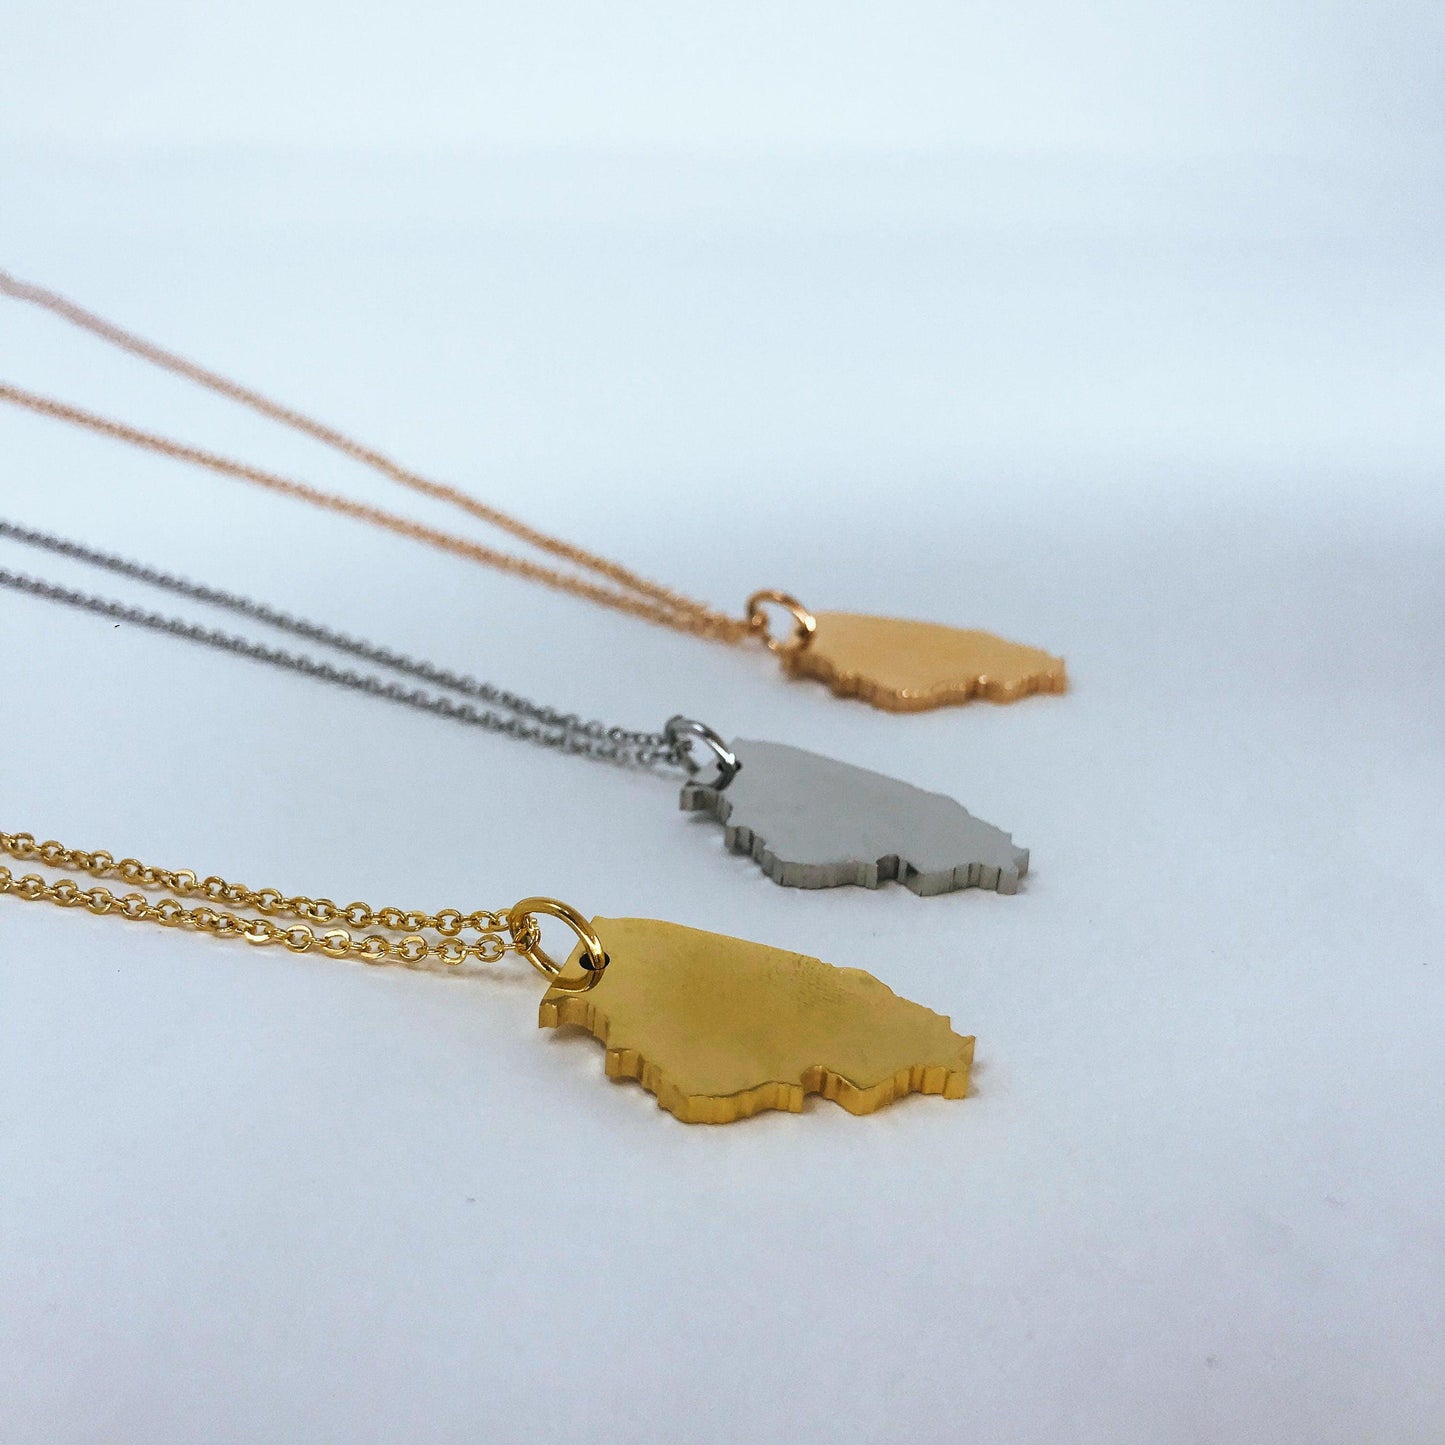 Illinois State Silhouette Necklaces in 3 different colors: Gold, Silver & Rose Gold